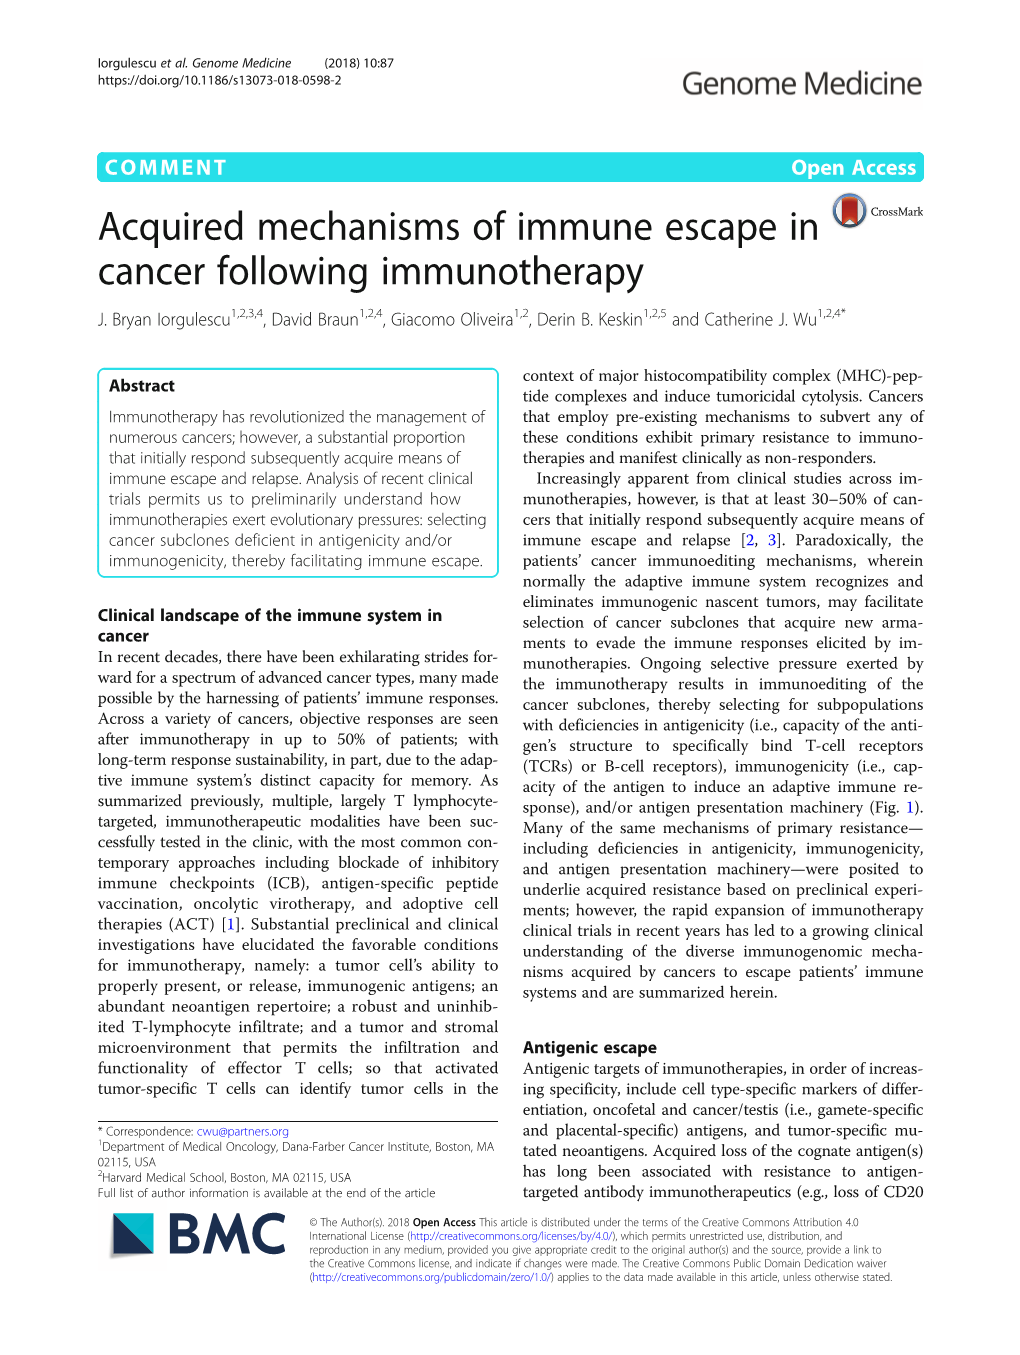 Acquired Mechanisms of Immune Escape in Cancer Following Immunotherapy J